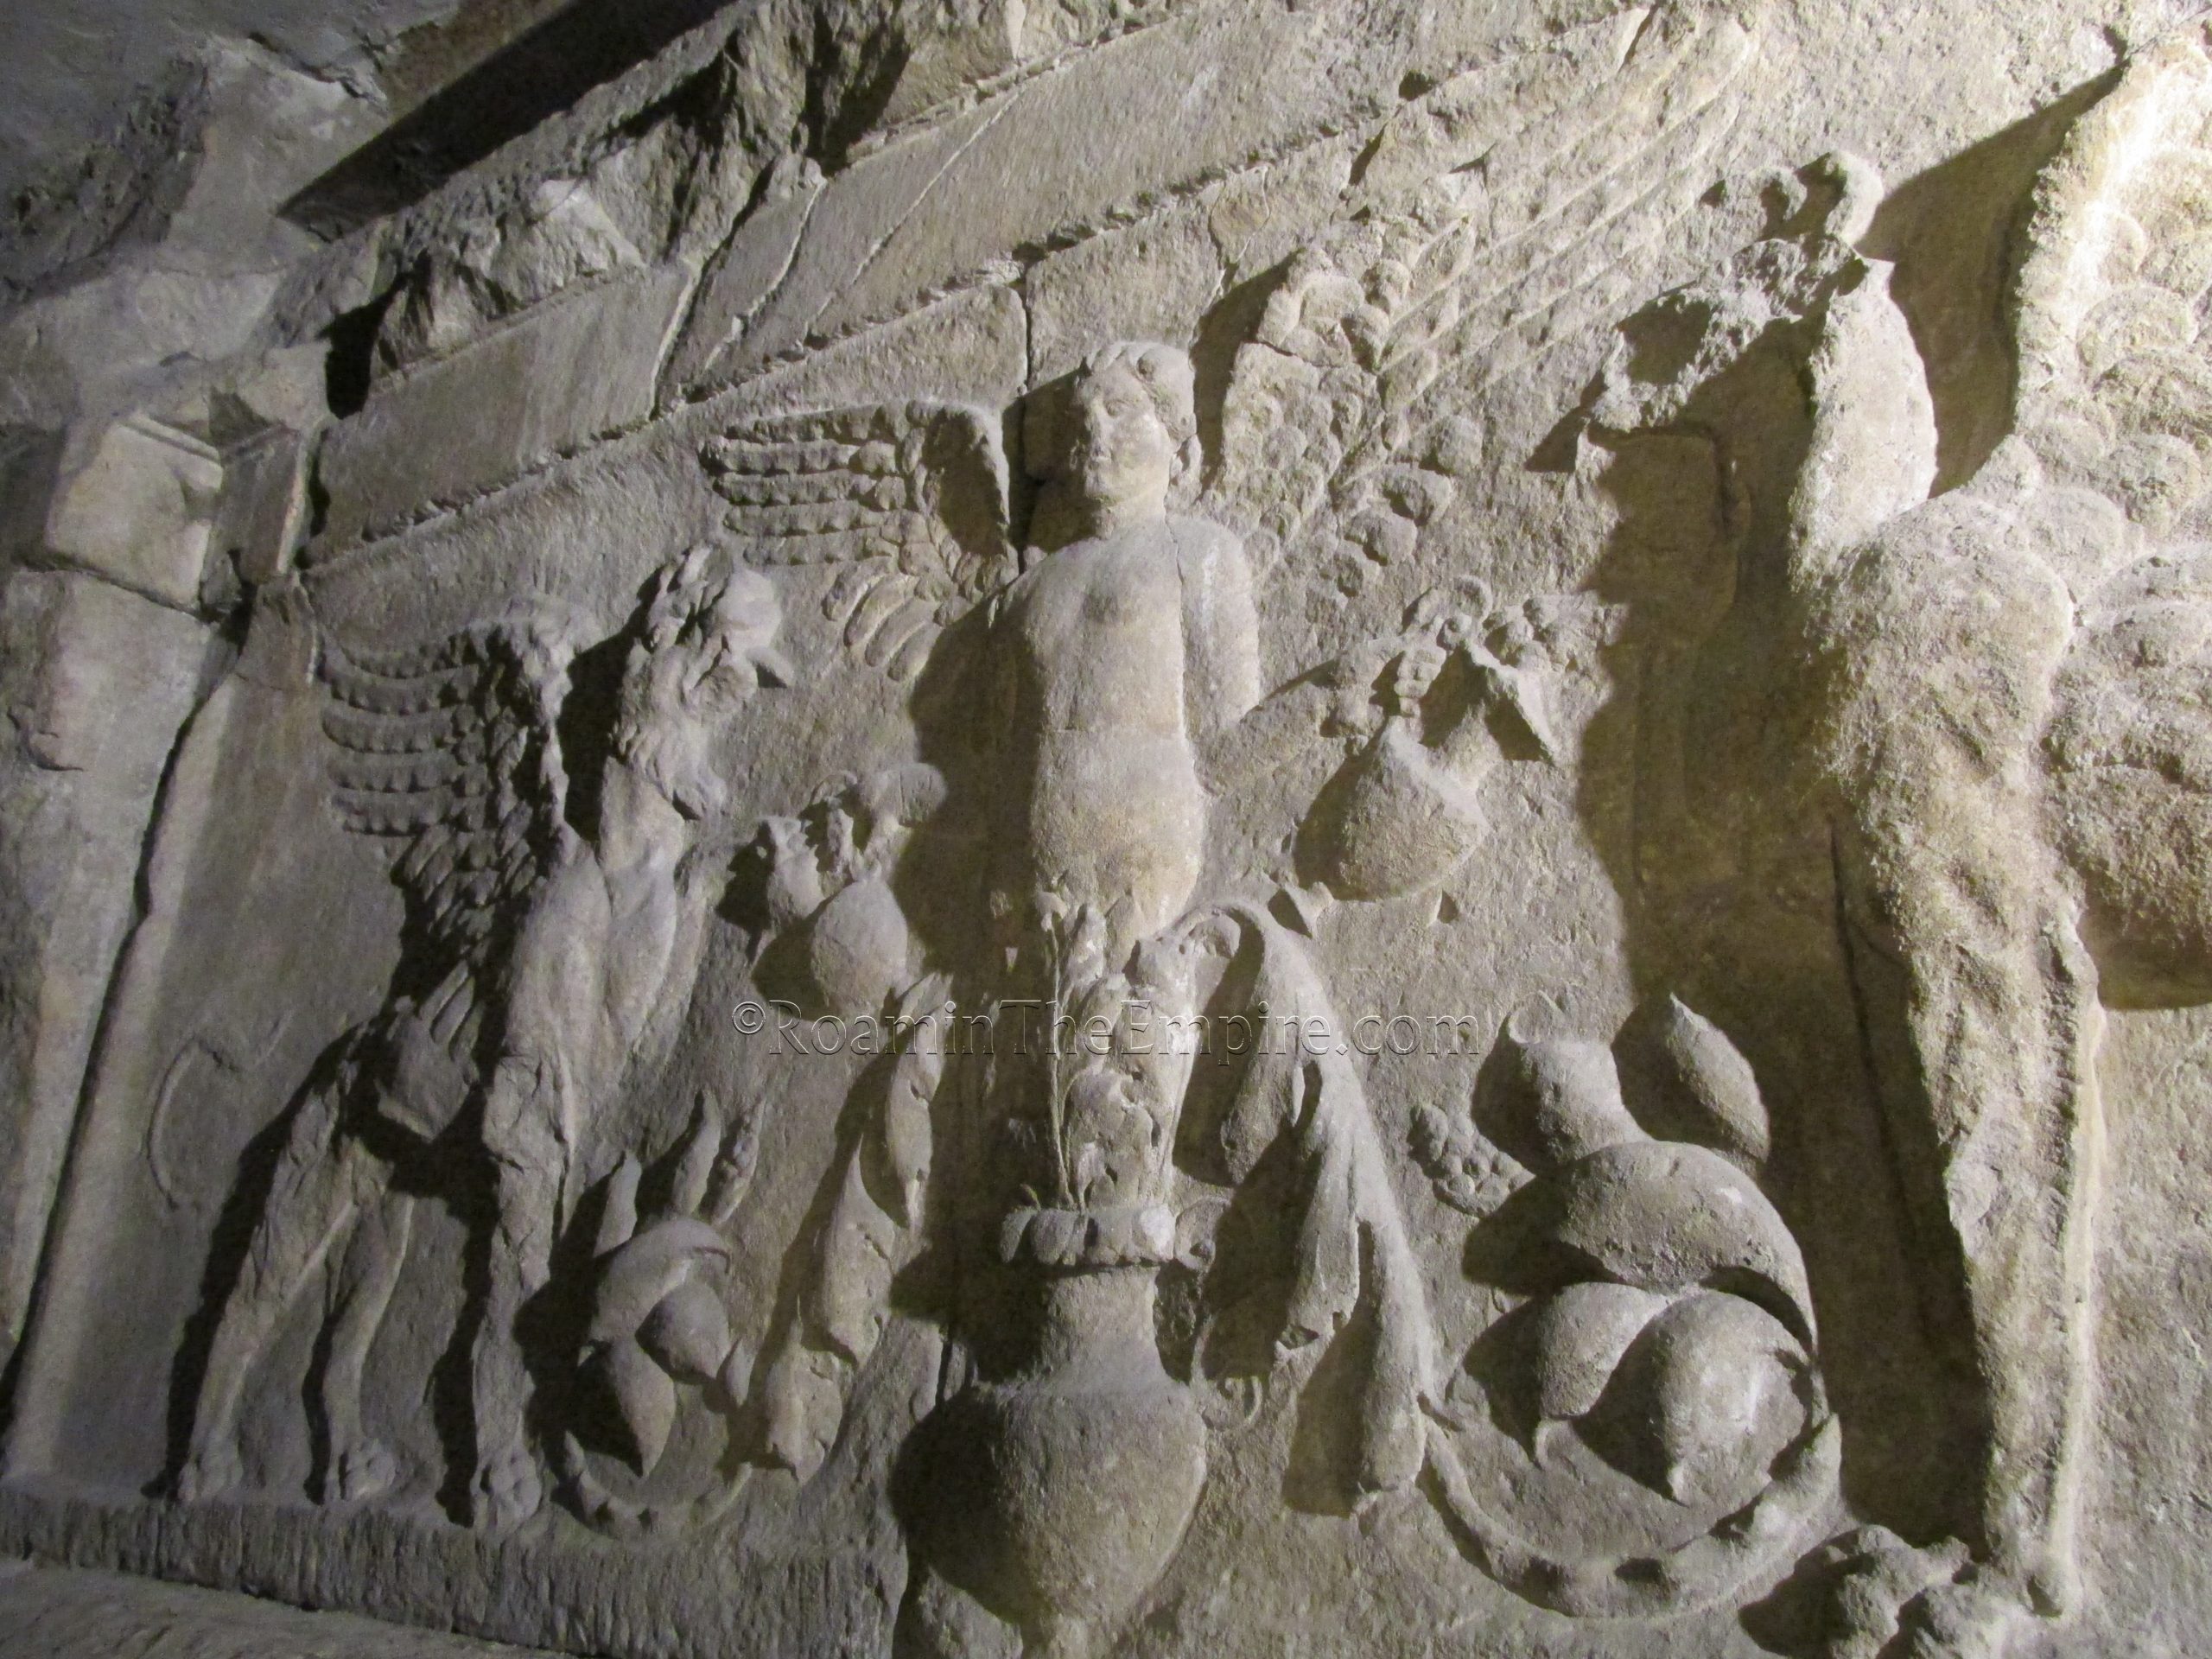 Cupid and griffins relief of the propylaeum, visible within the base of the bell tower. Tergeste.